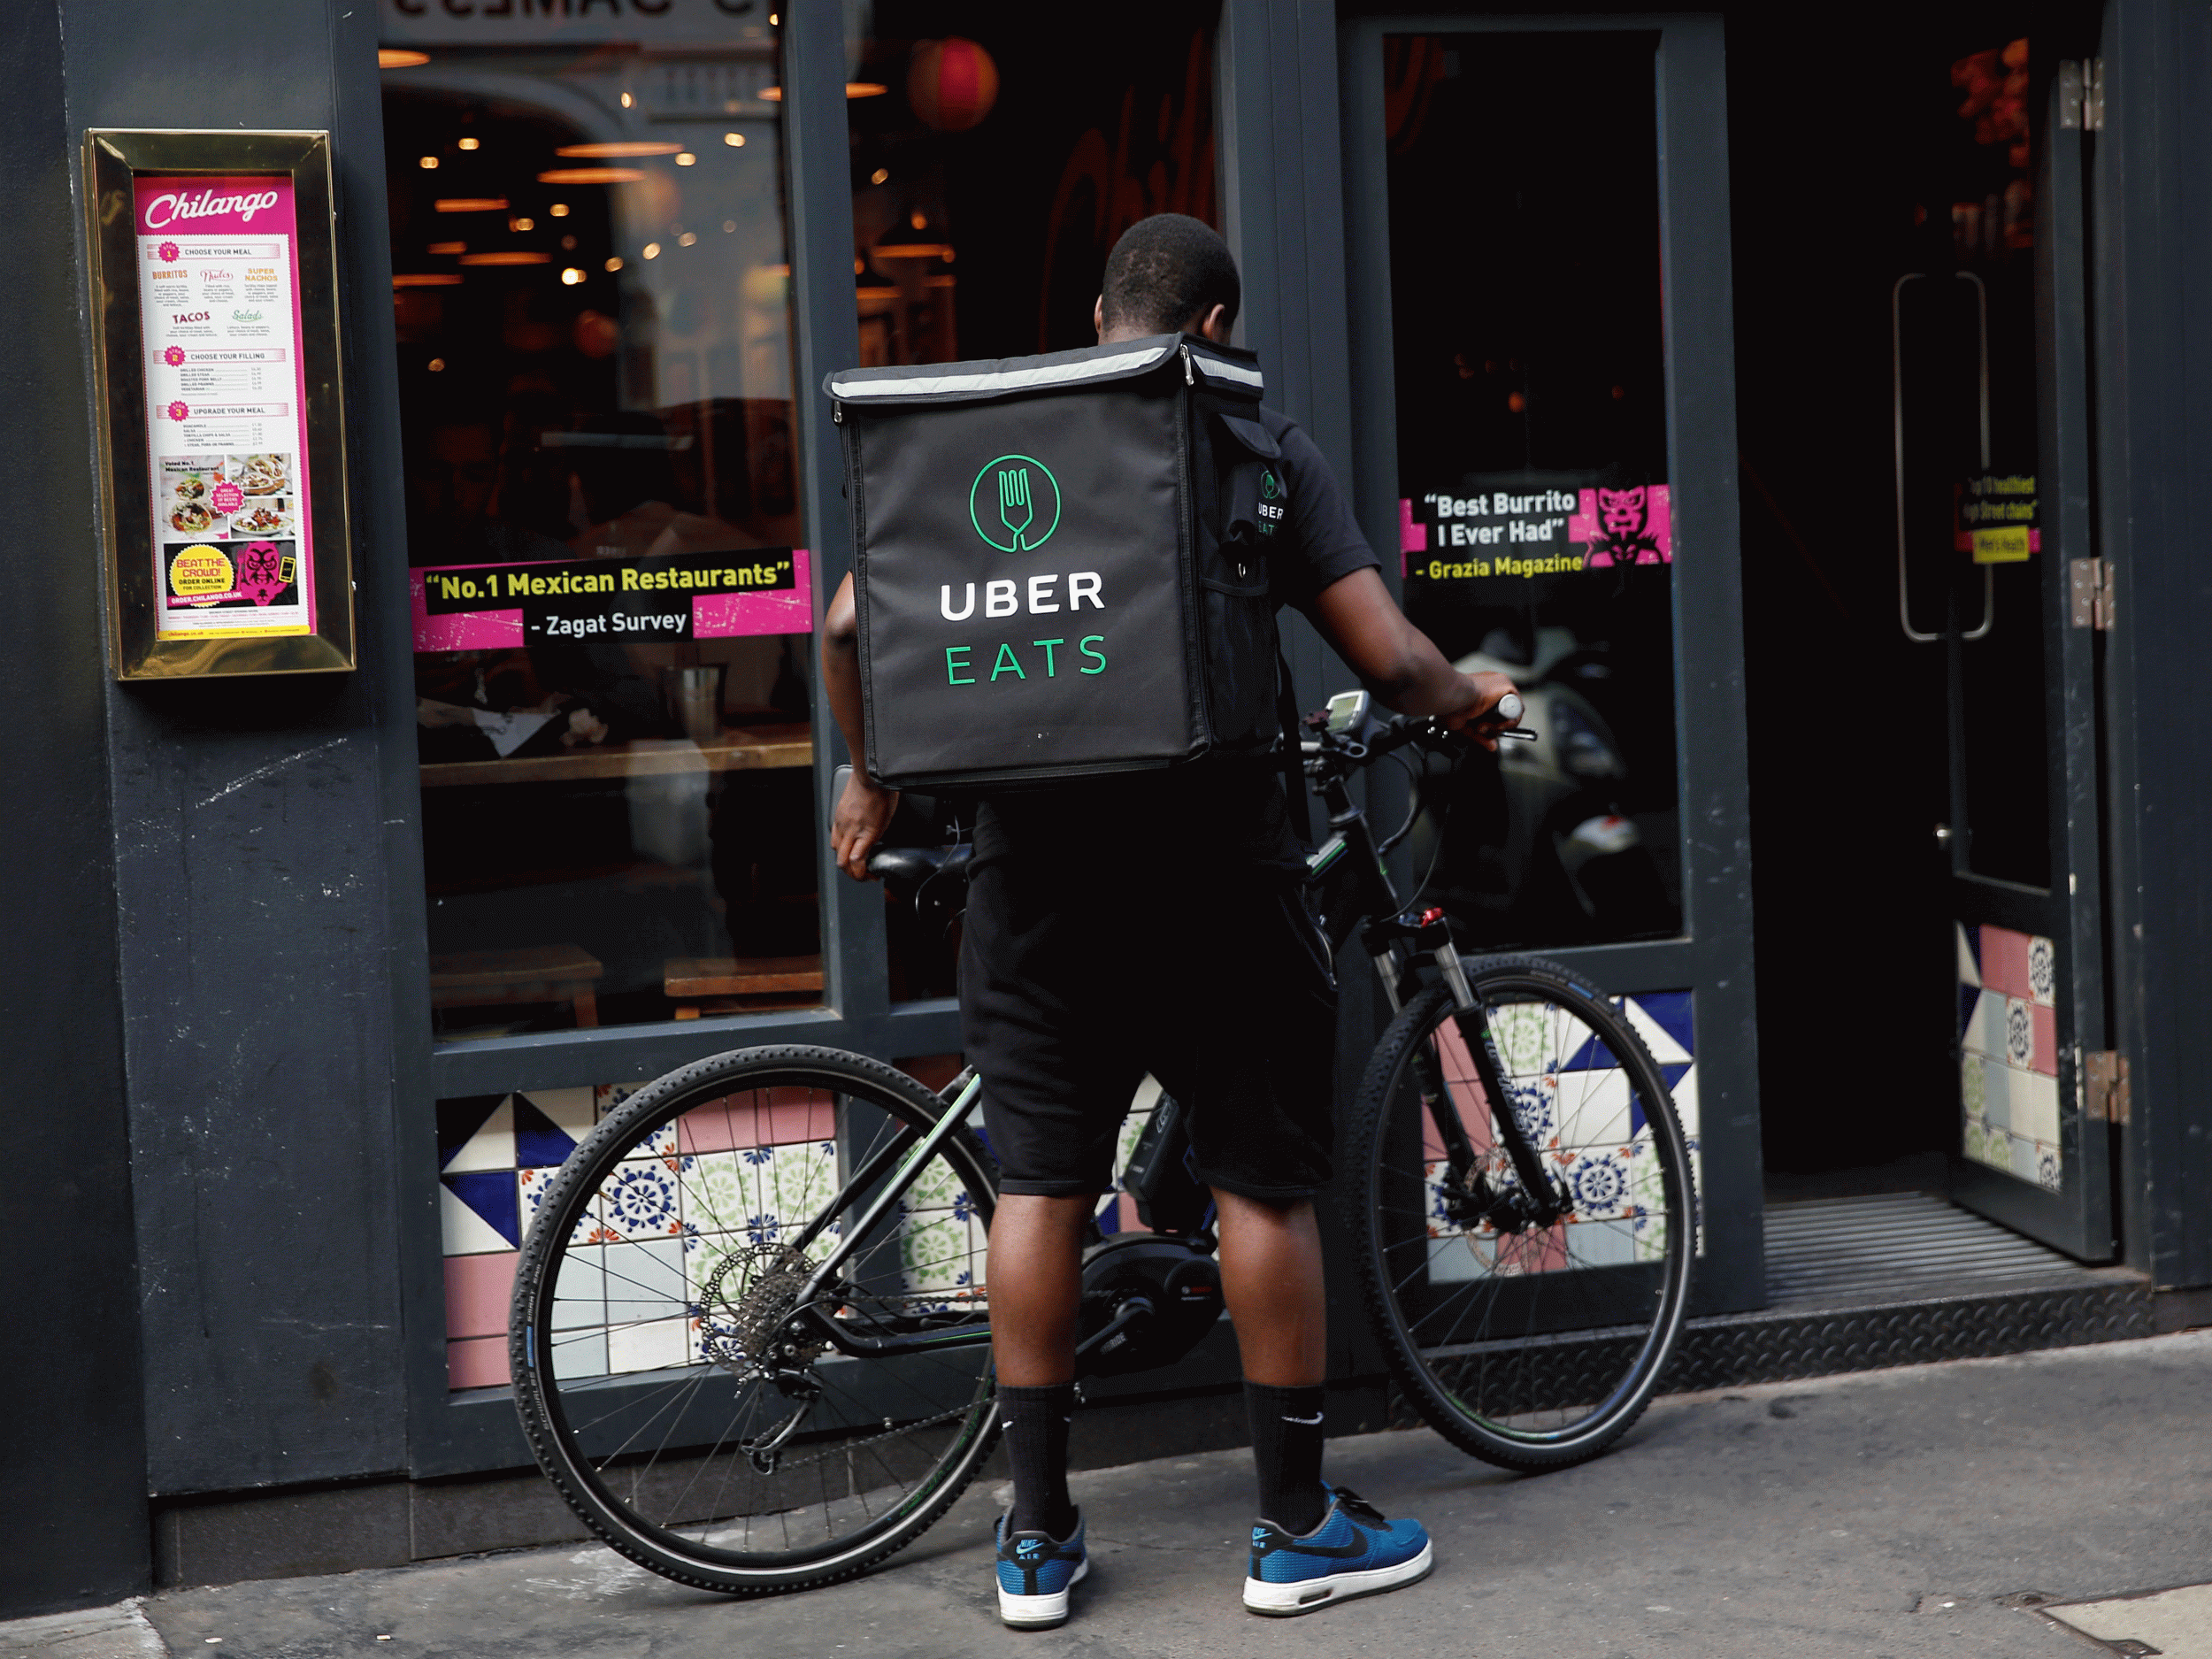 How workers’ rights in the gig economy may be about to change